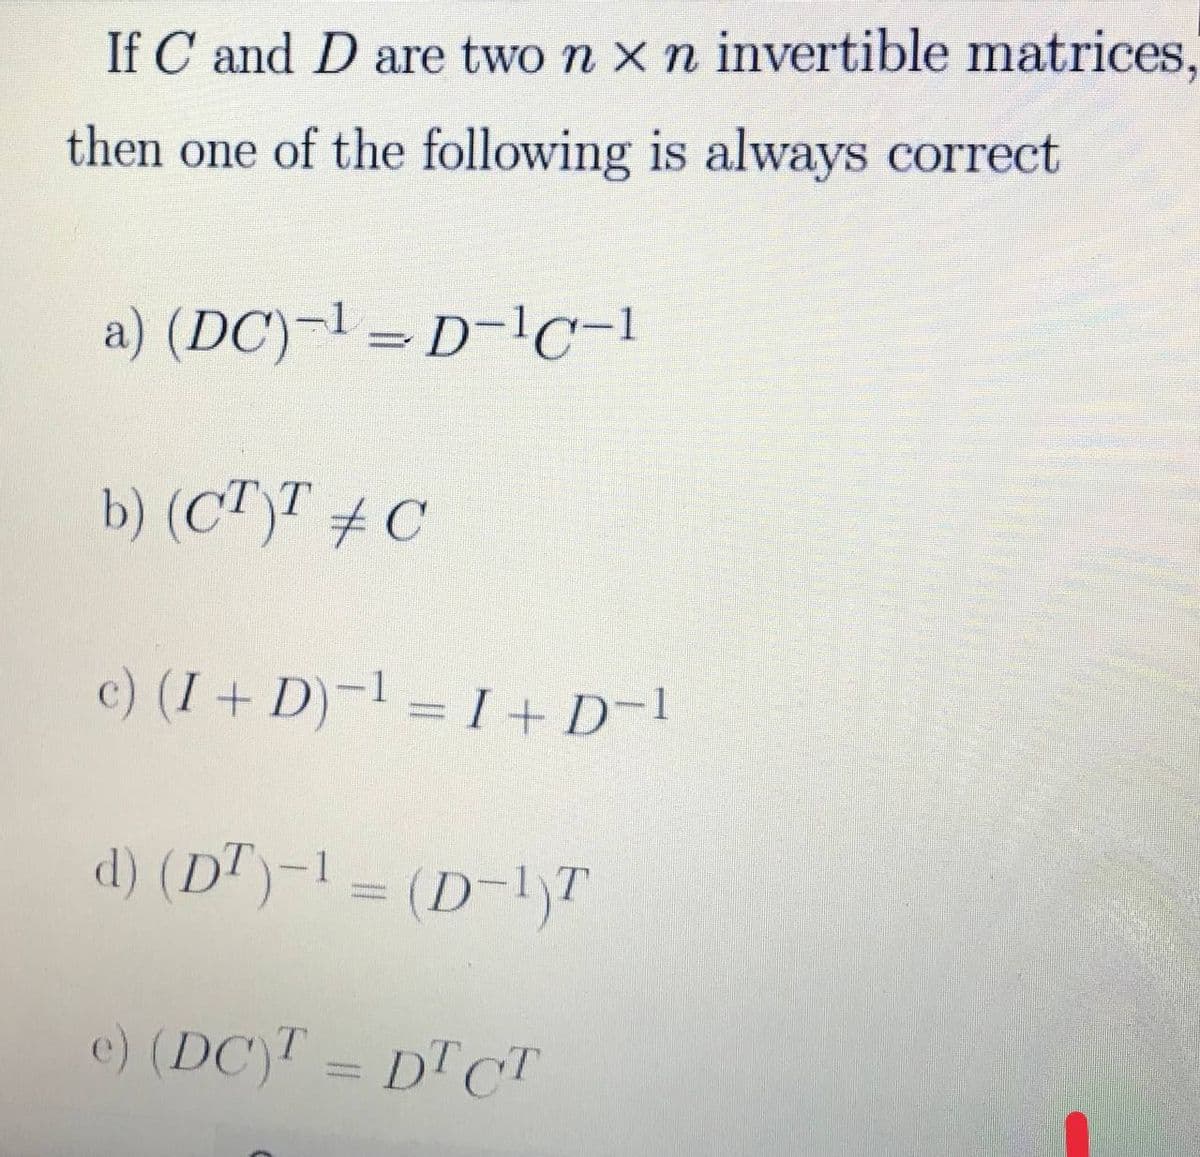 If C and D are two n x n invertible matrices,
then one of the following is always correct
a) (DC)¬l = D-lc-1
b) (CT)T # C
c) (I+ D)-1 = I + D-1
d) (DT)-1 = (D-1)T
e) (DC)T =
DT CT
